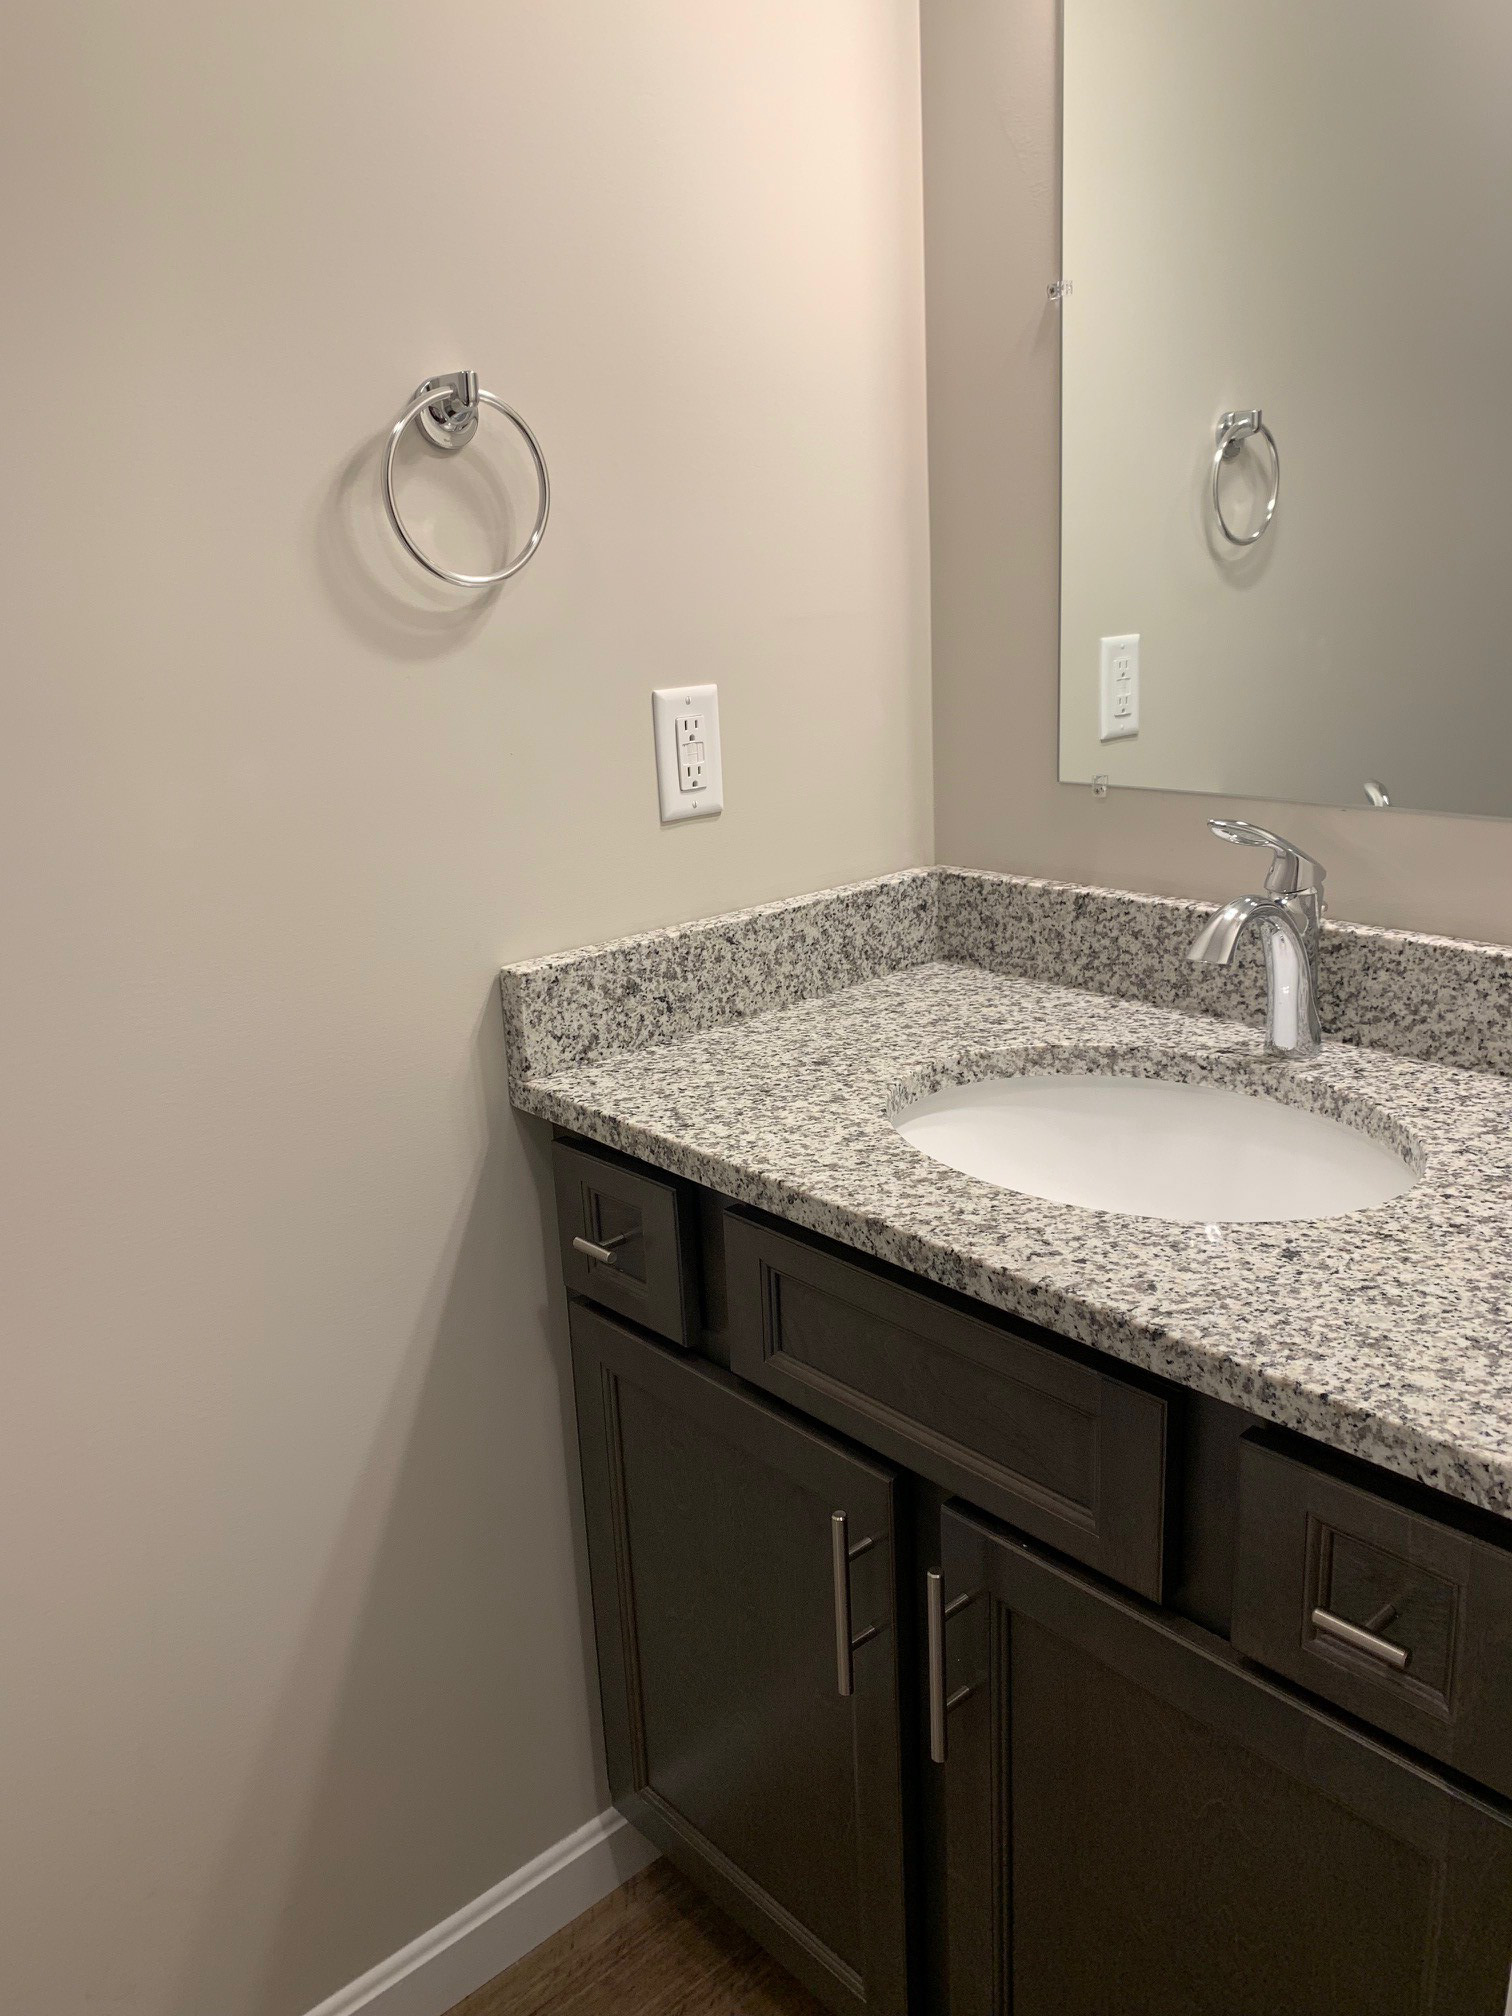 The Timbers half bath by Socha Companies is a quality townhouse community in Manchester, NH